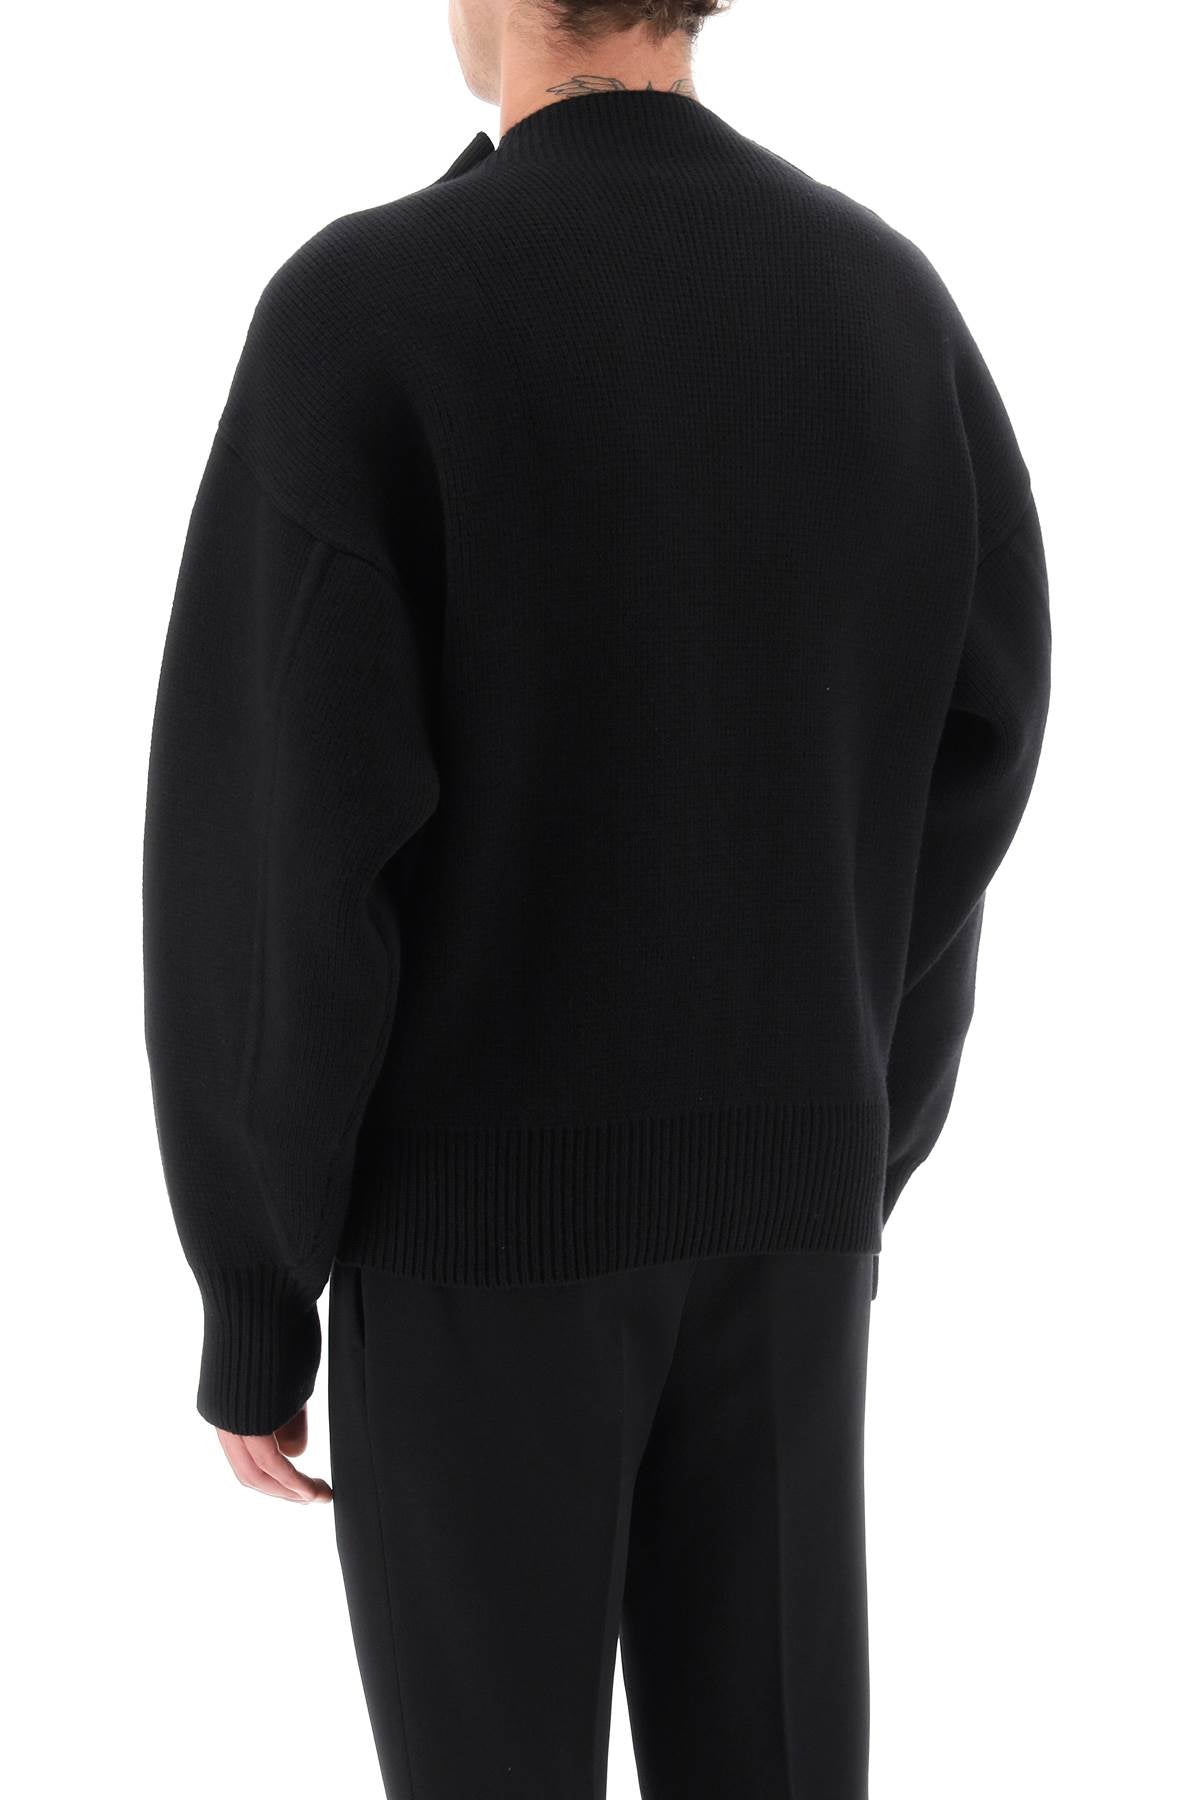 FERRAGAMO Embroidered Crew-Neck Sweater with Metal Buttons